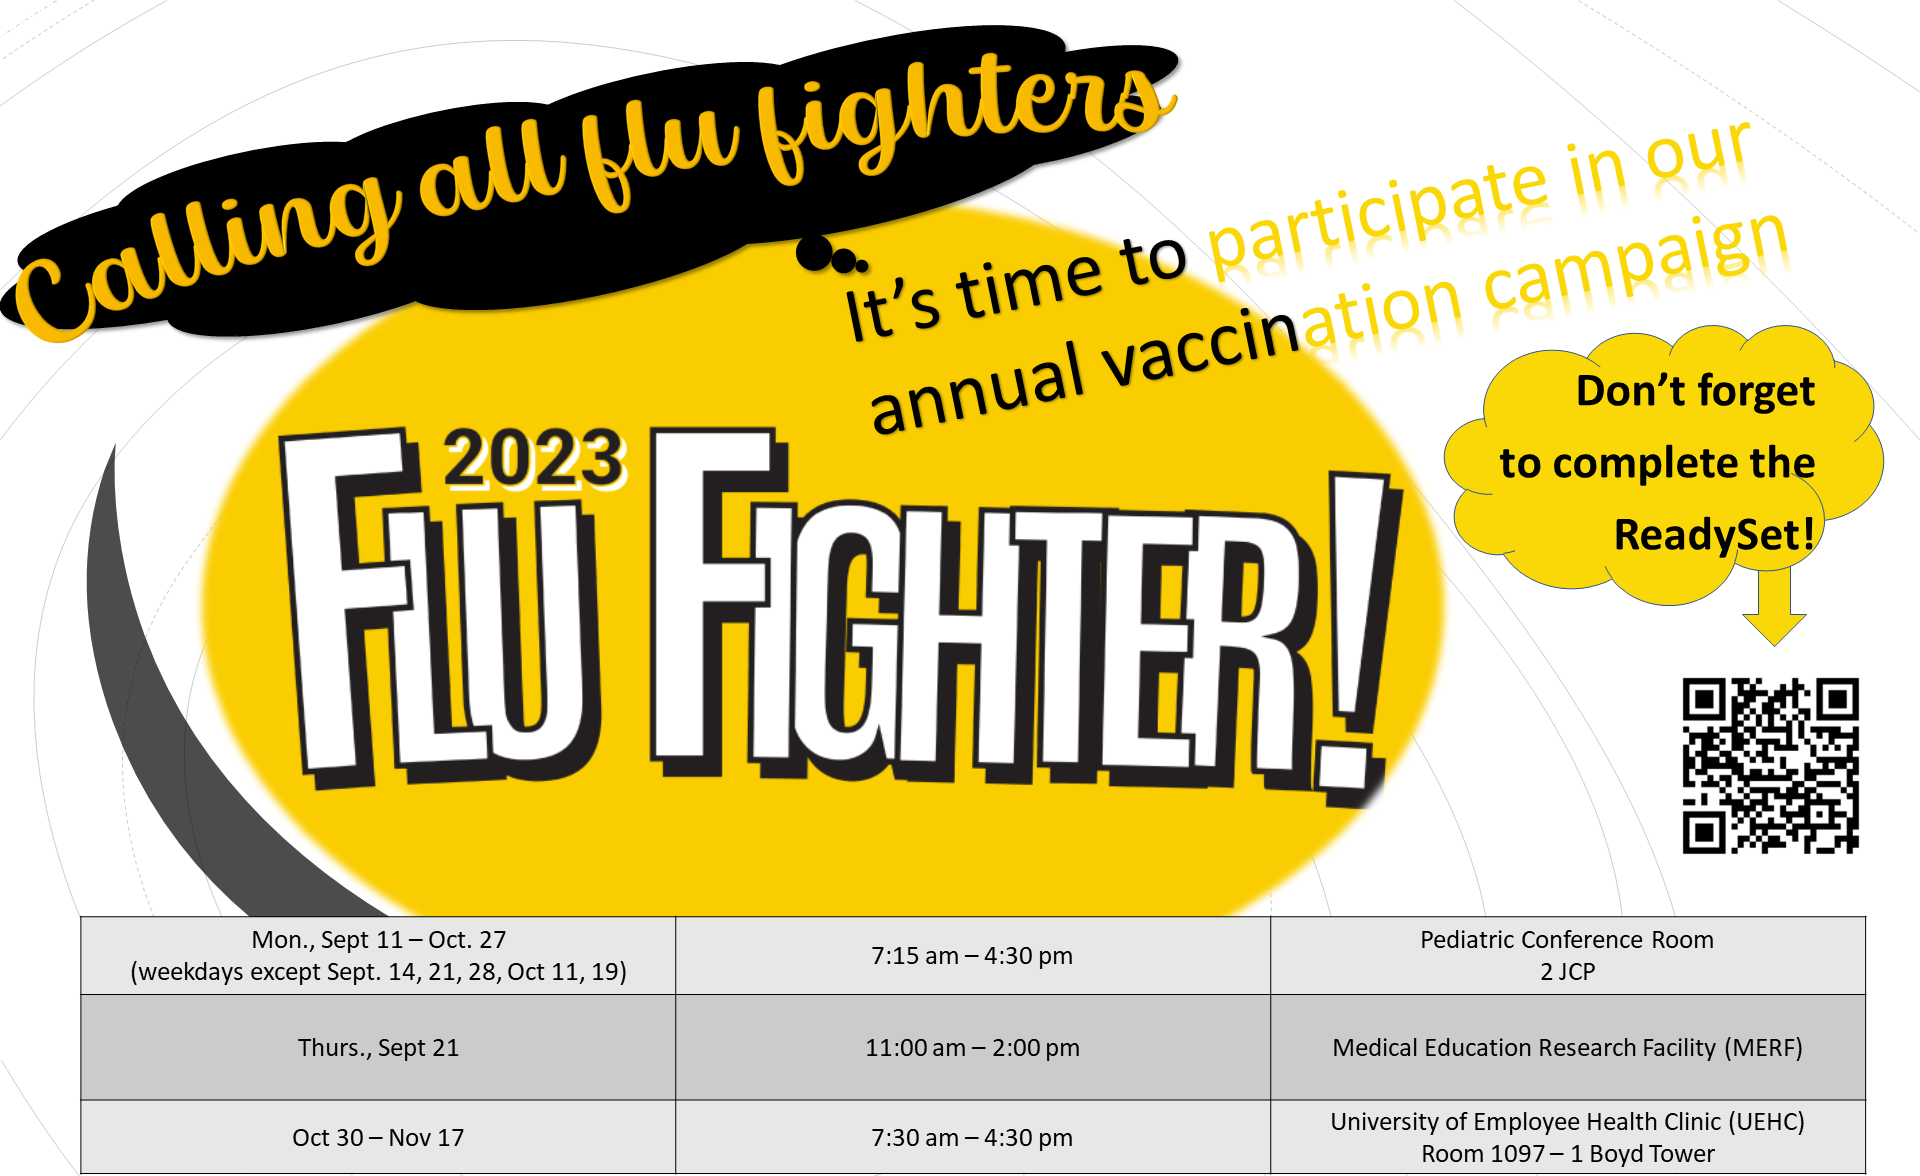 Calling all flu fighters 2023